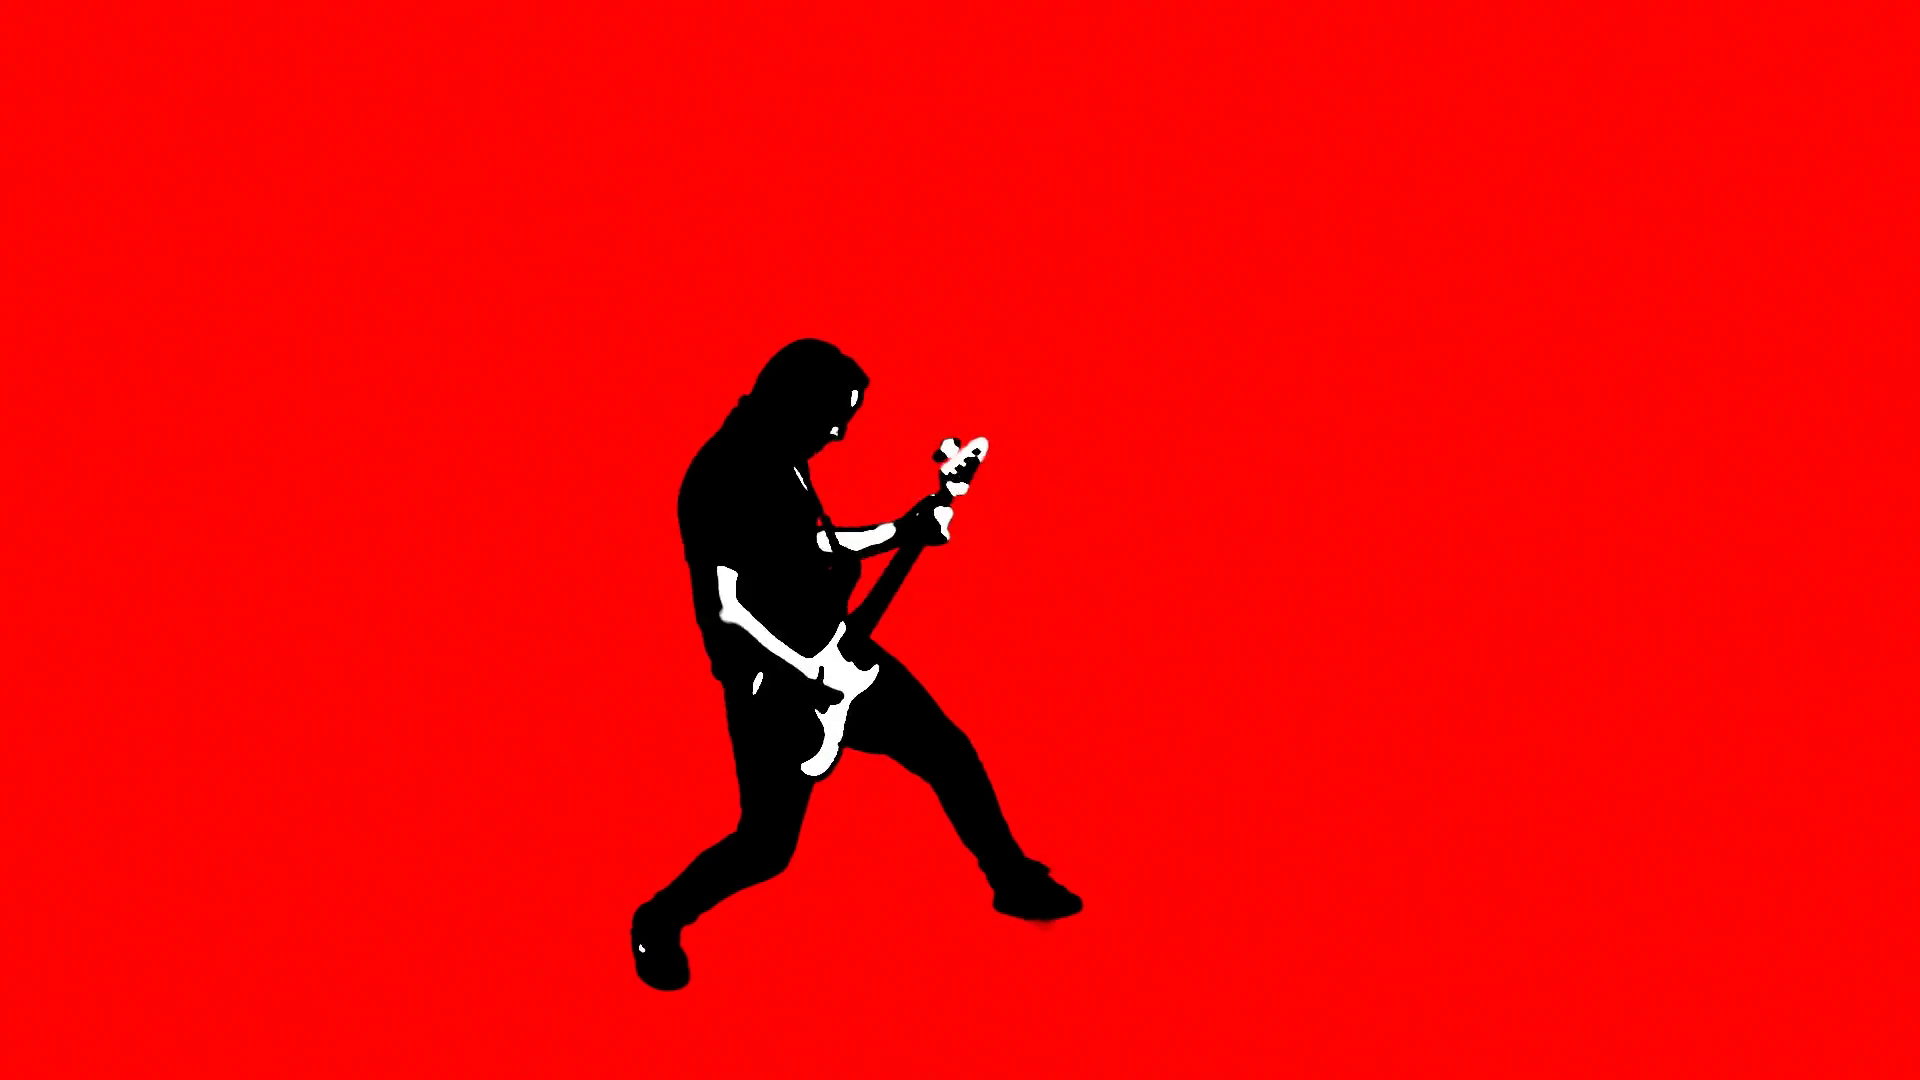 Rockstar Flipping His Guitar On Red Background Totally Awesome